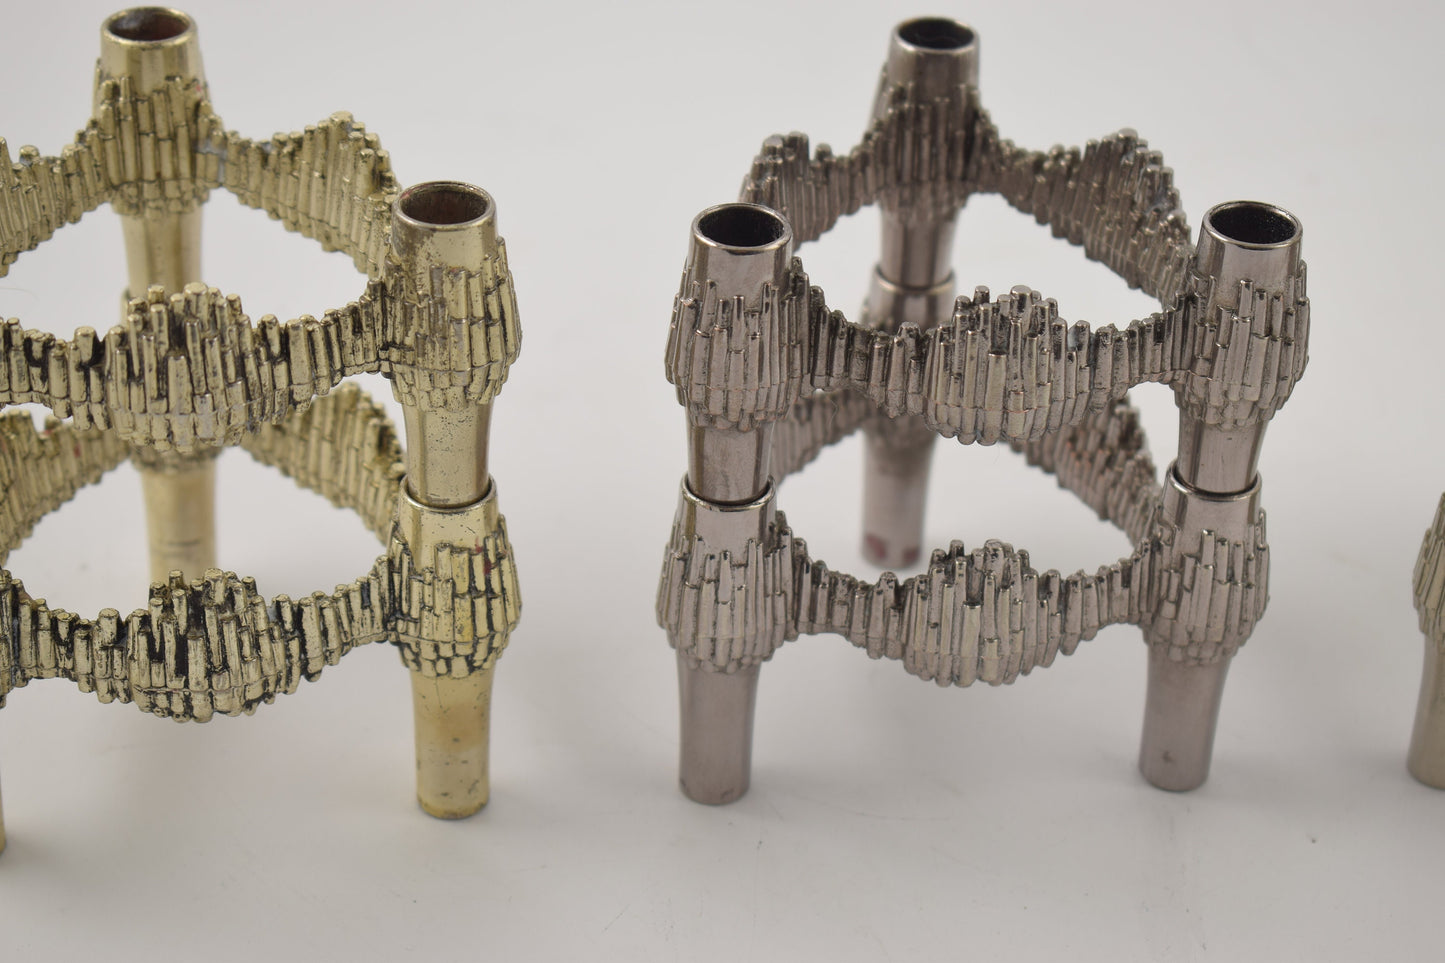 8 candlesticks Quist Nagel, West Germany, typical candle holder from the 1960s and 1970s